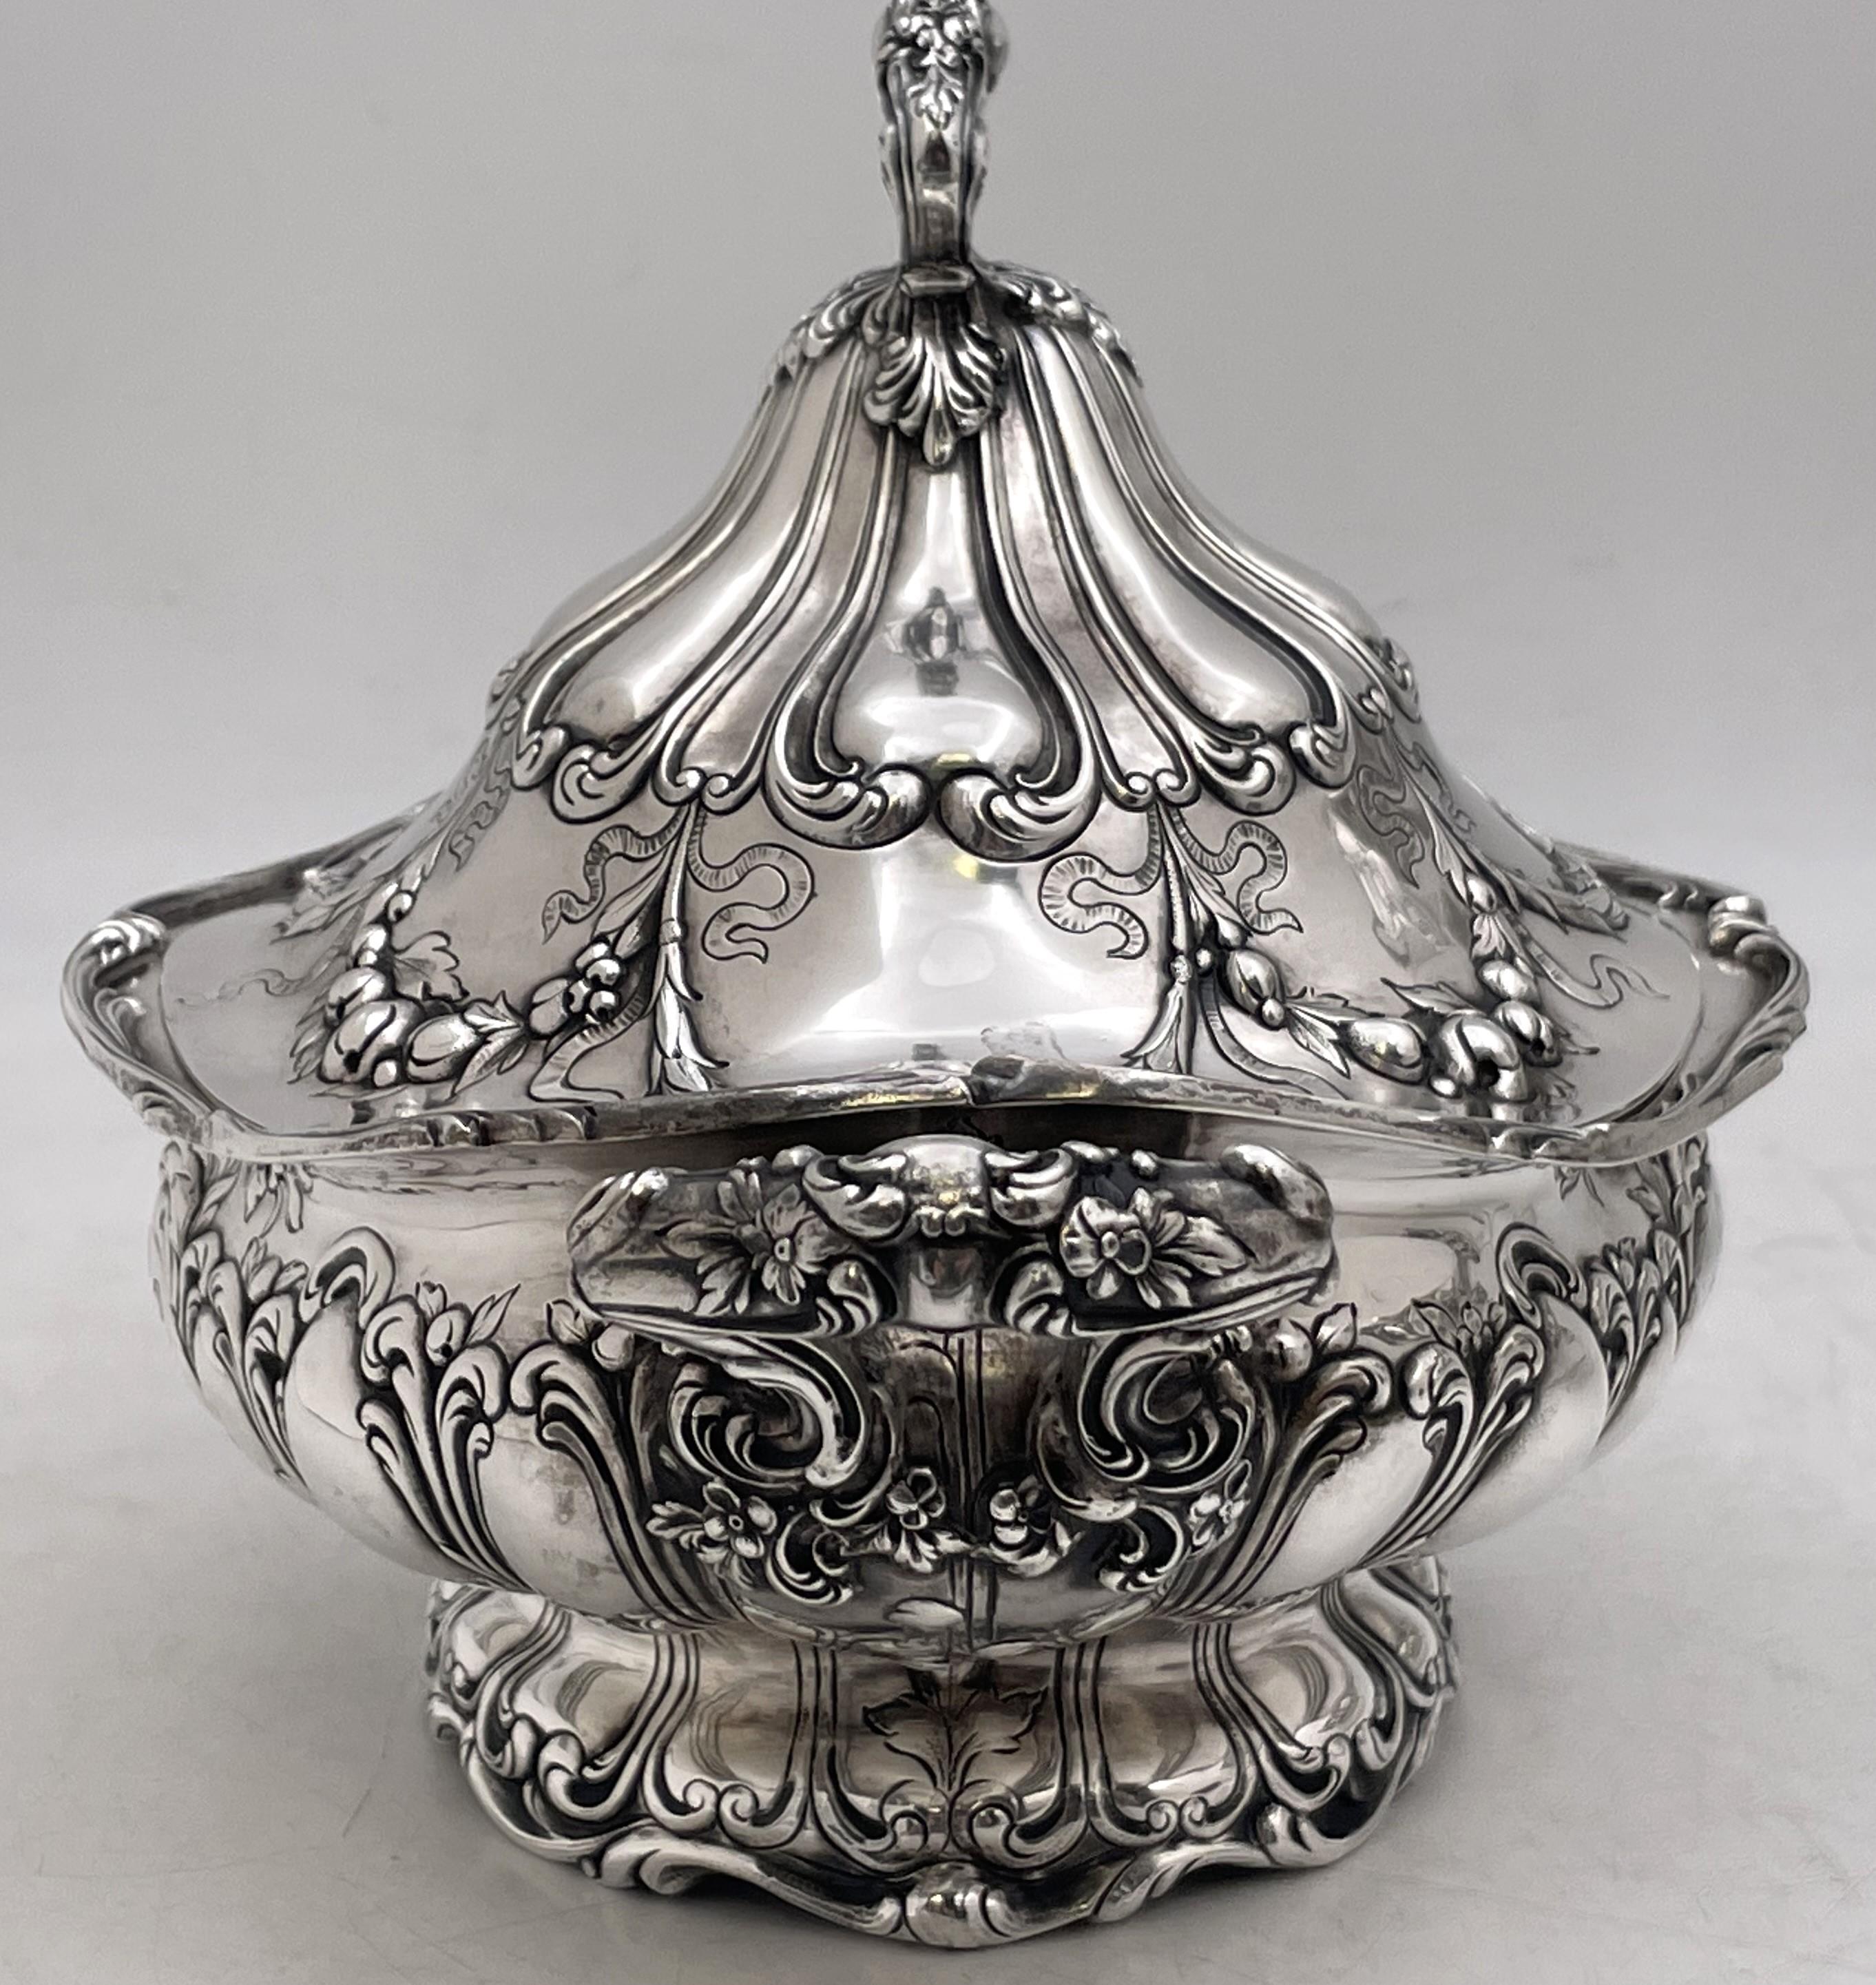 American Gorham Chantilly Grande Pair of Sterling Silver 1900 Tureens Art Nouveau Style